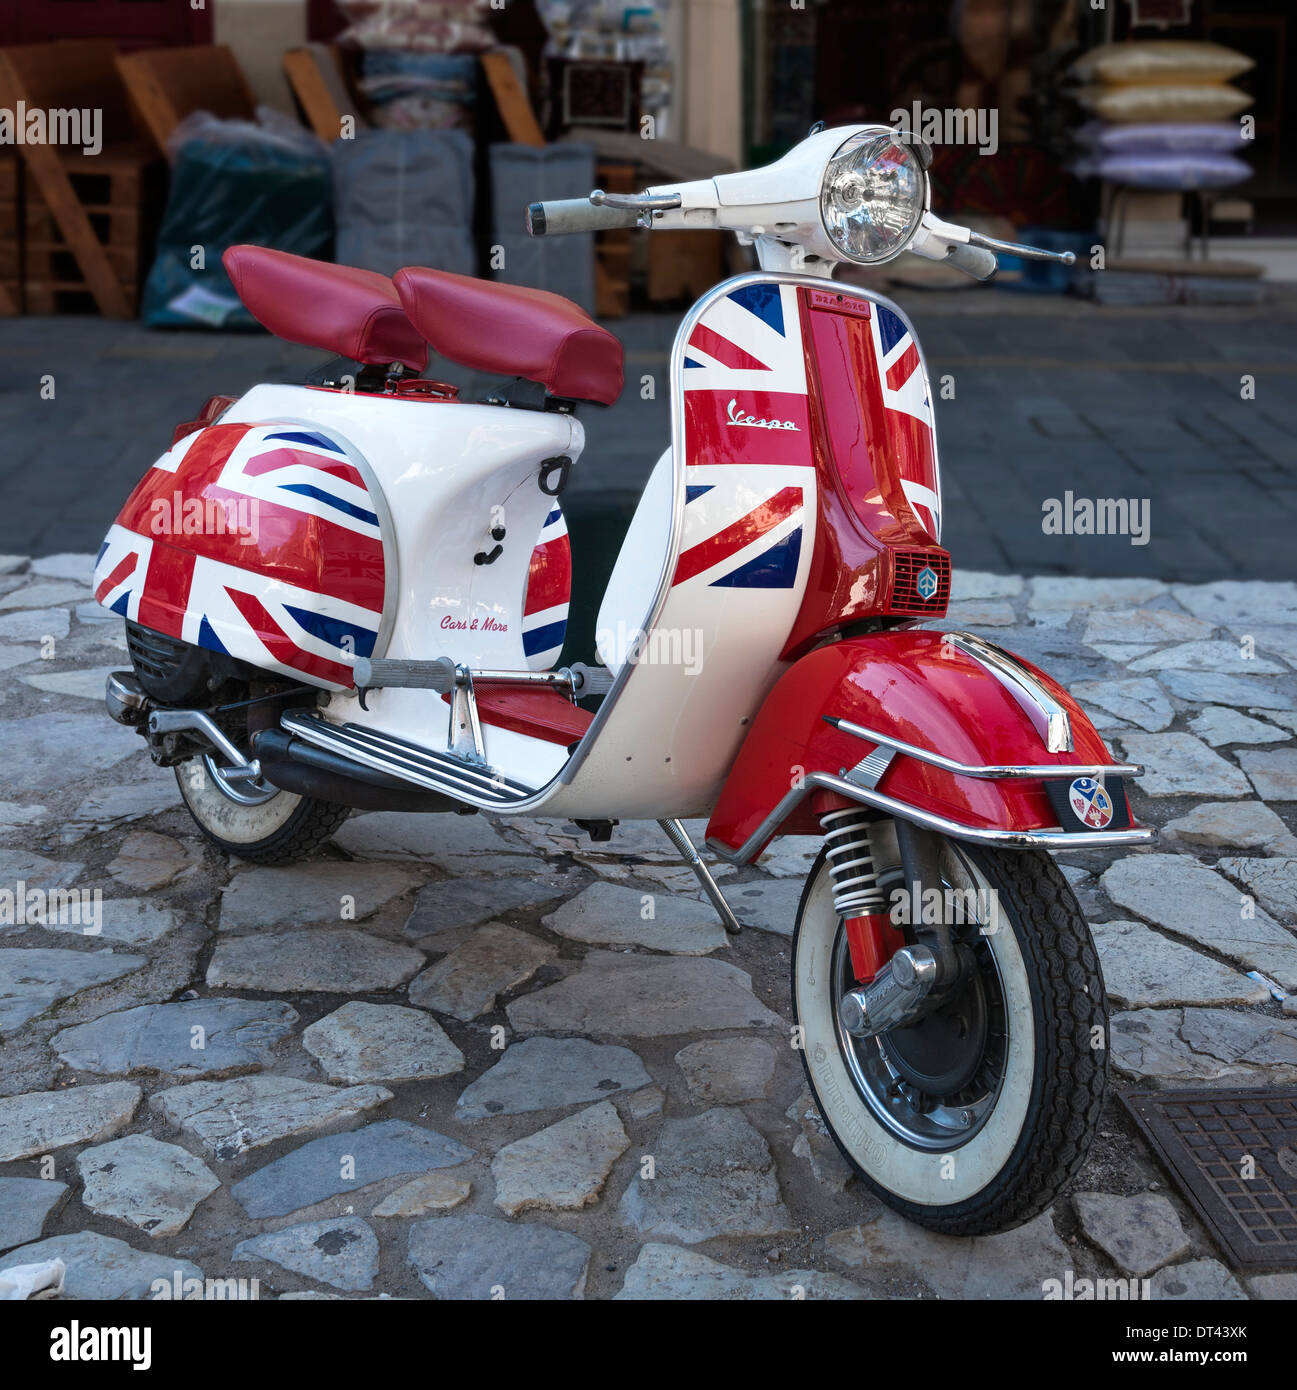 A Piaggio Vespa scooter, painted with the flag and colours of the Union Jack, seen in Kalamata, Peloponnese, Greece Stock Photo